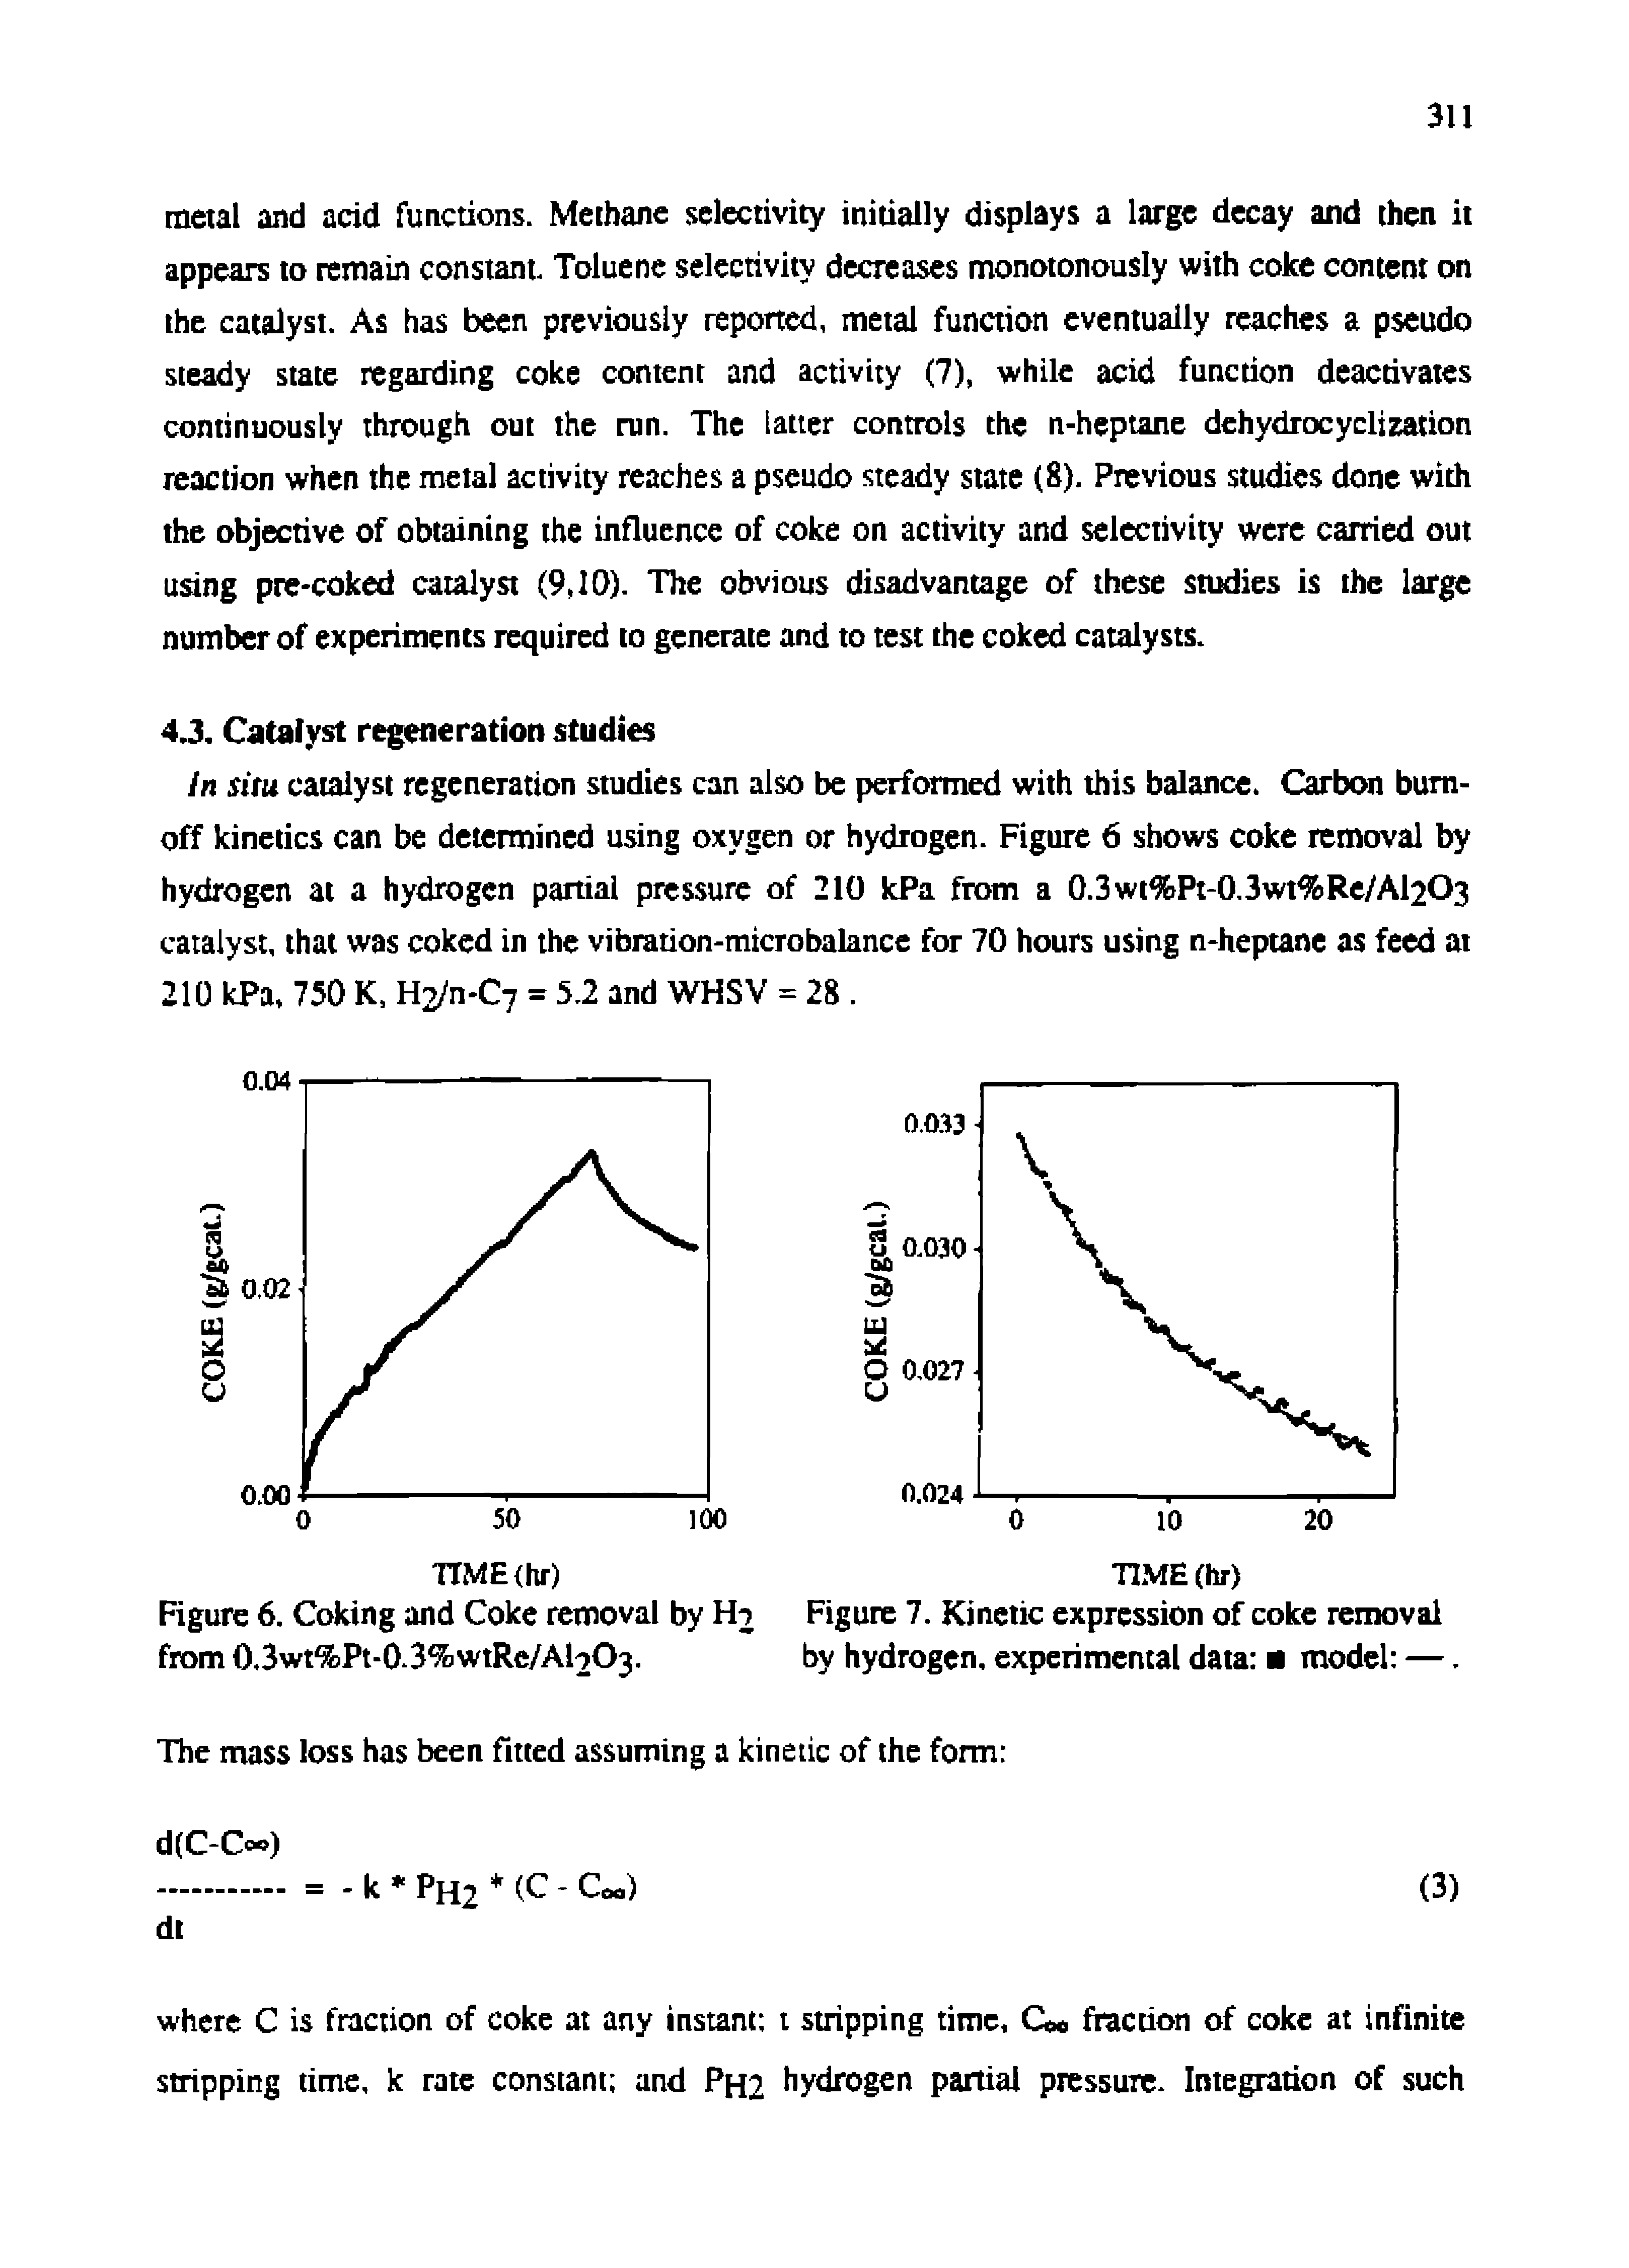 Figure 6. Coking and Coke removal by Fb from 0,3wt%Pt-0.3%wtRe/AbO3.